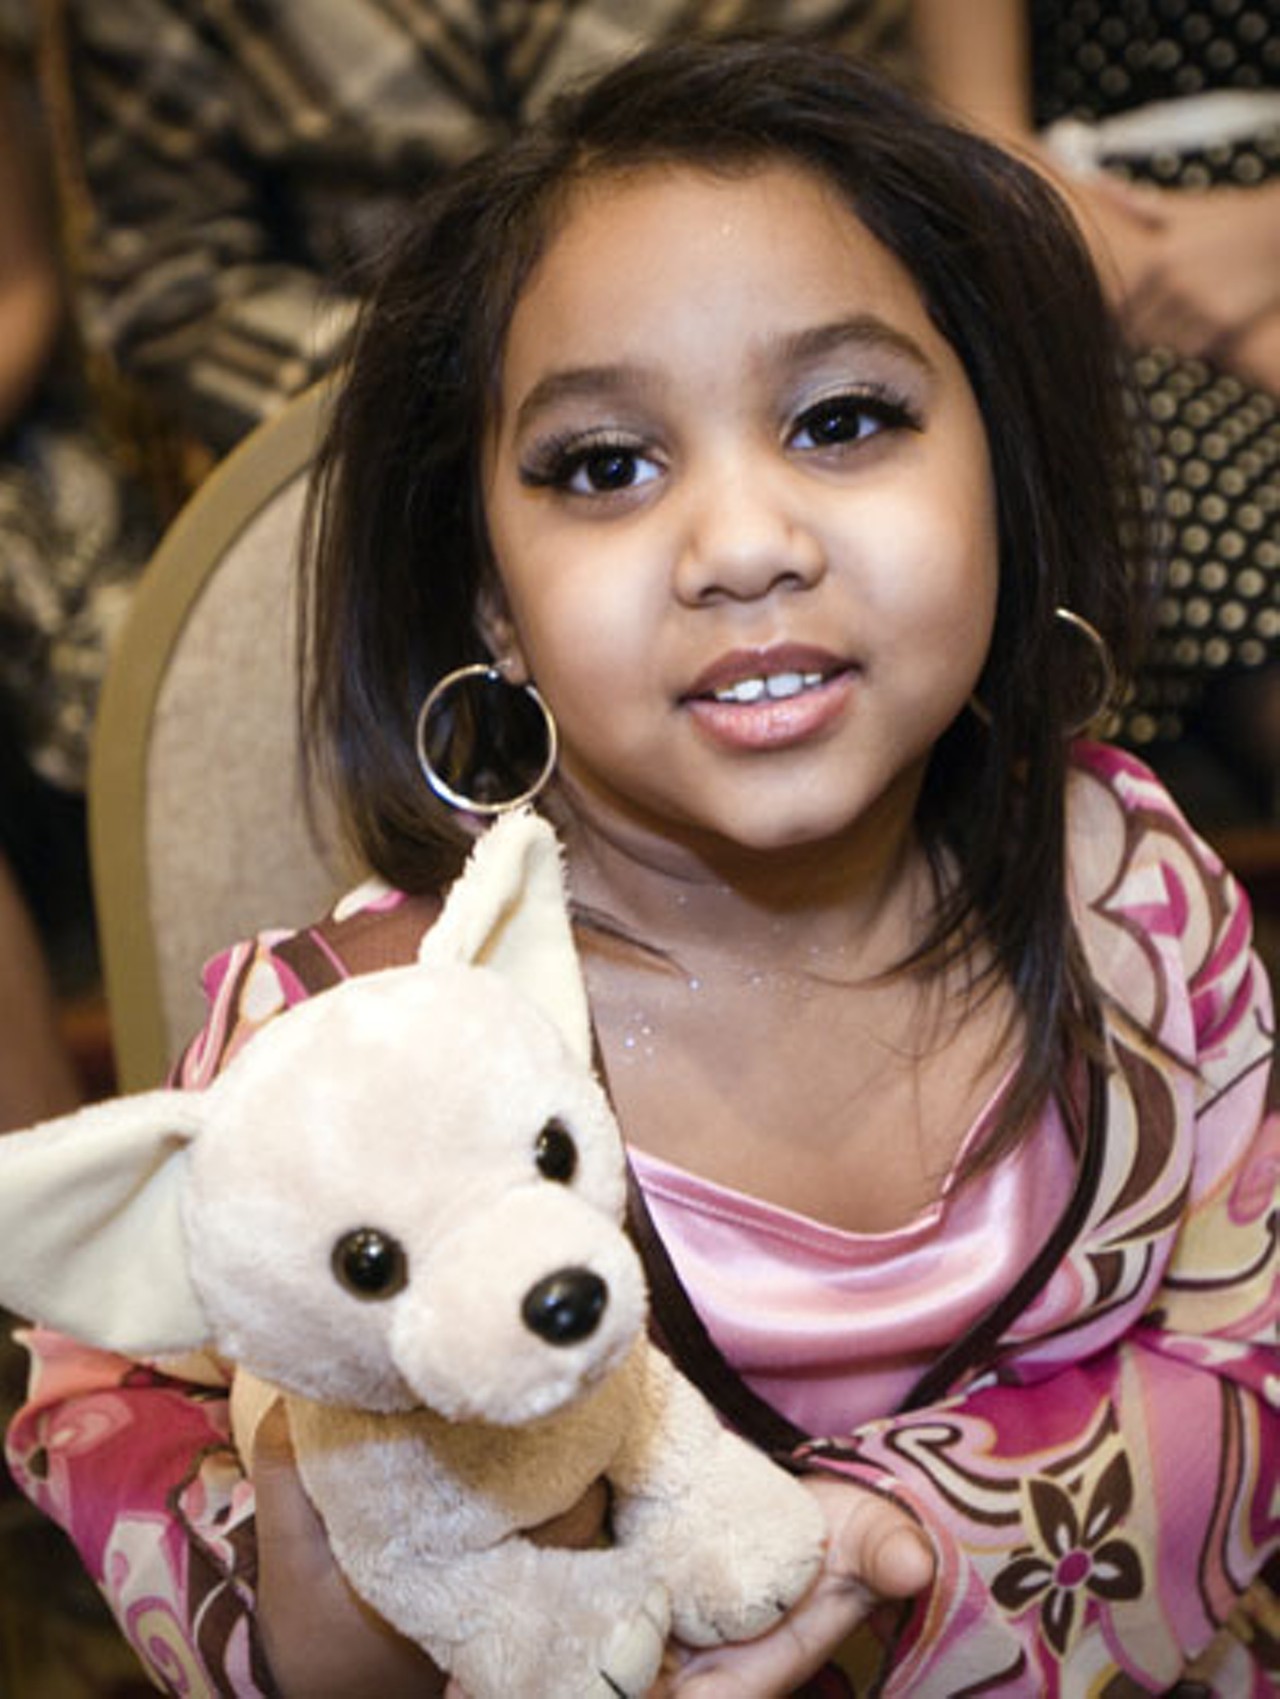 Four-year-old Amiah Williams with her stuffed chihuahua didn't make it to Nationals. She competed at the state level as Little Miss Florissant.